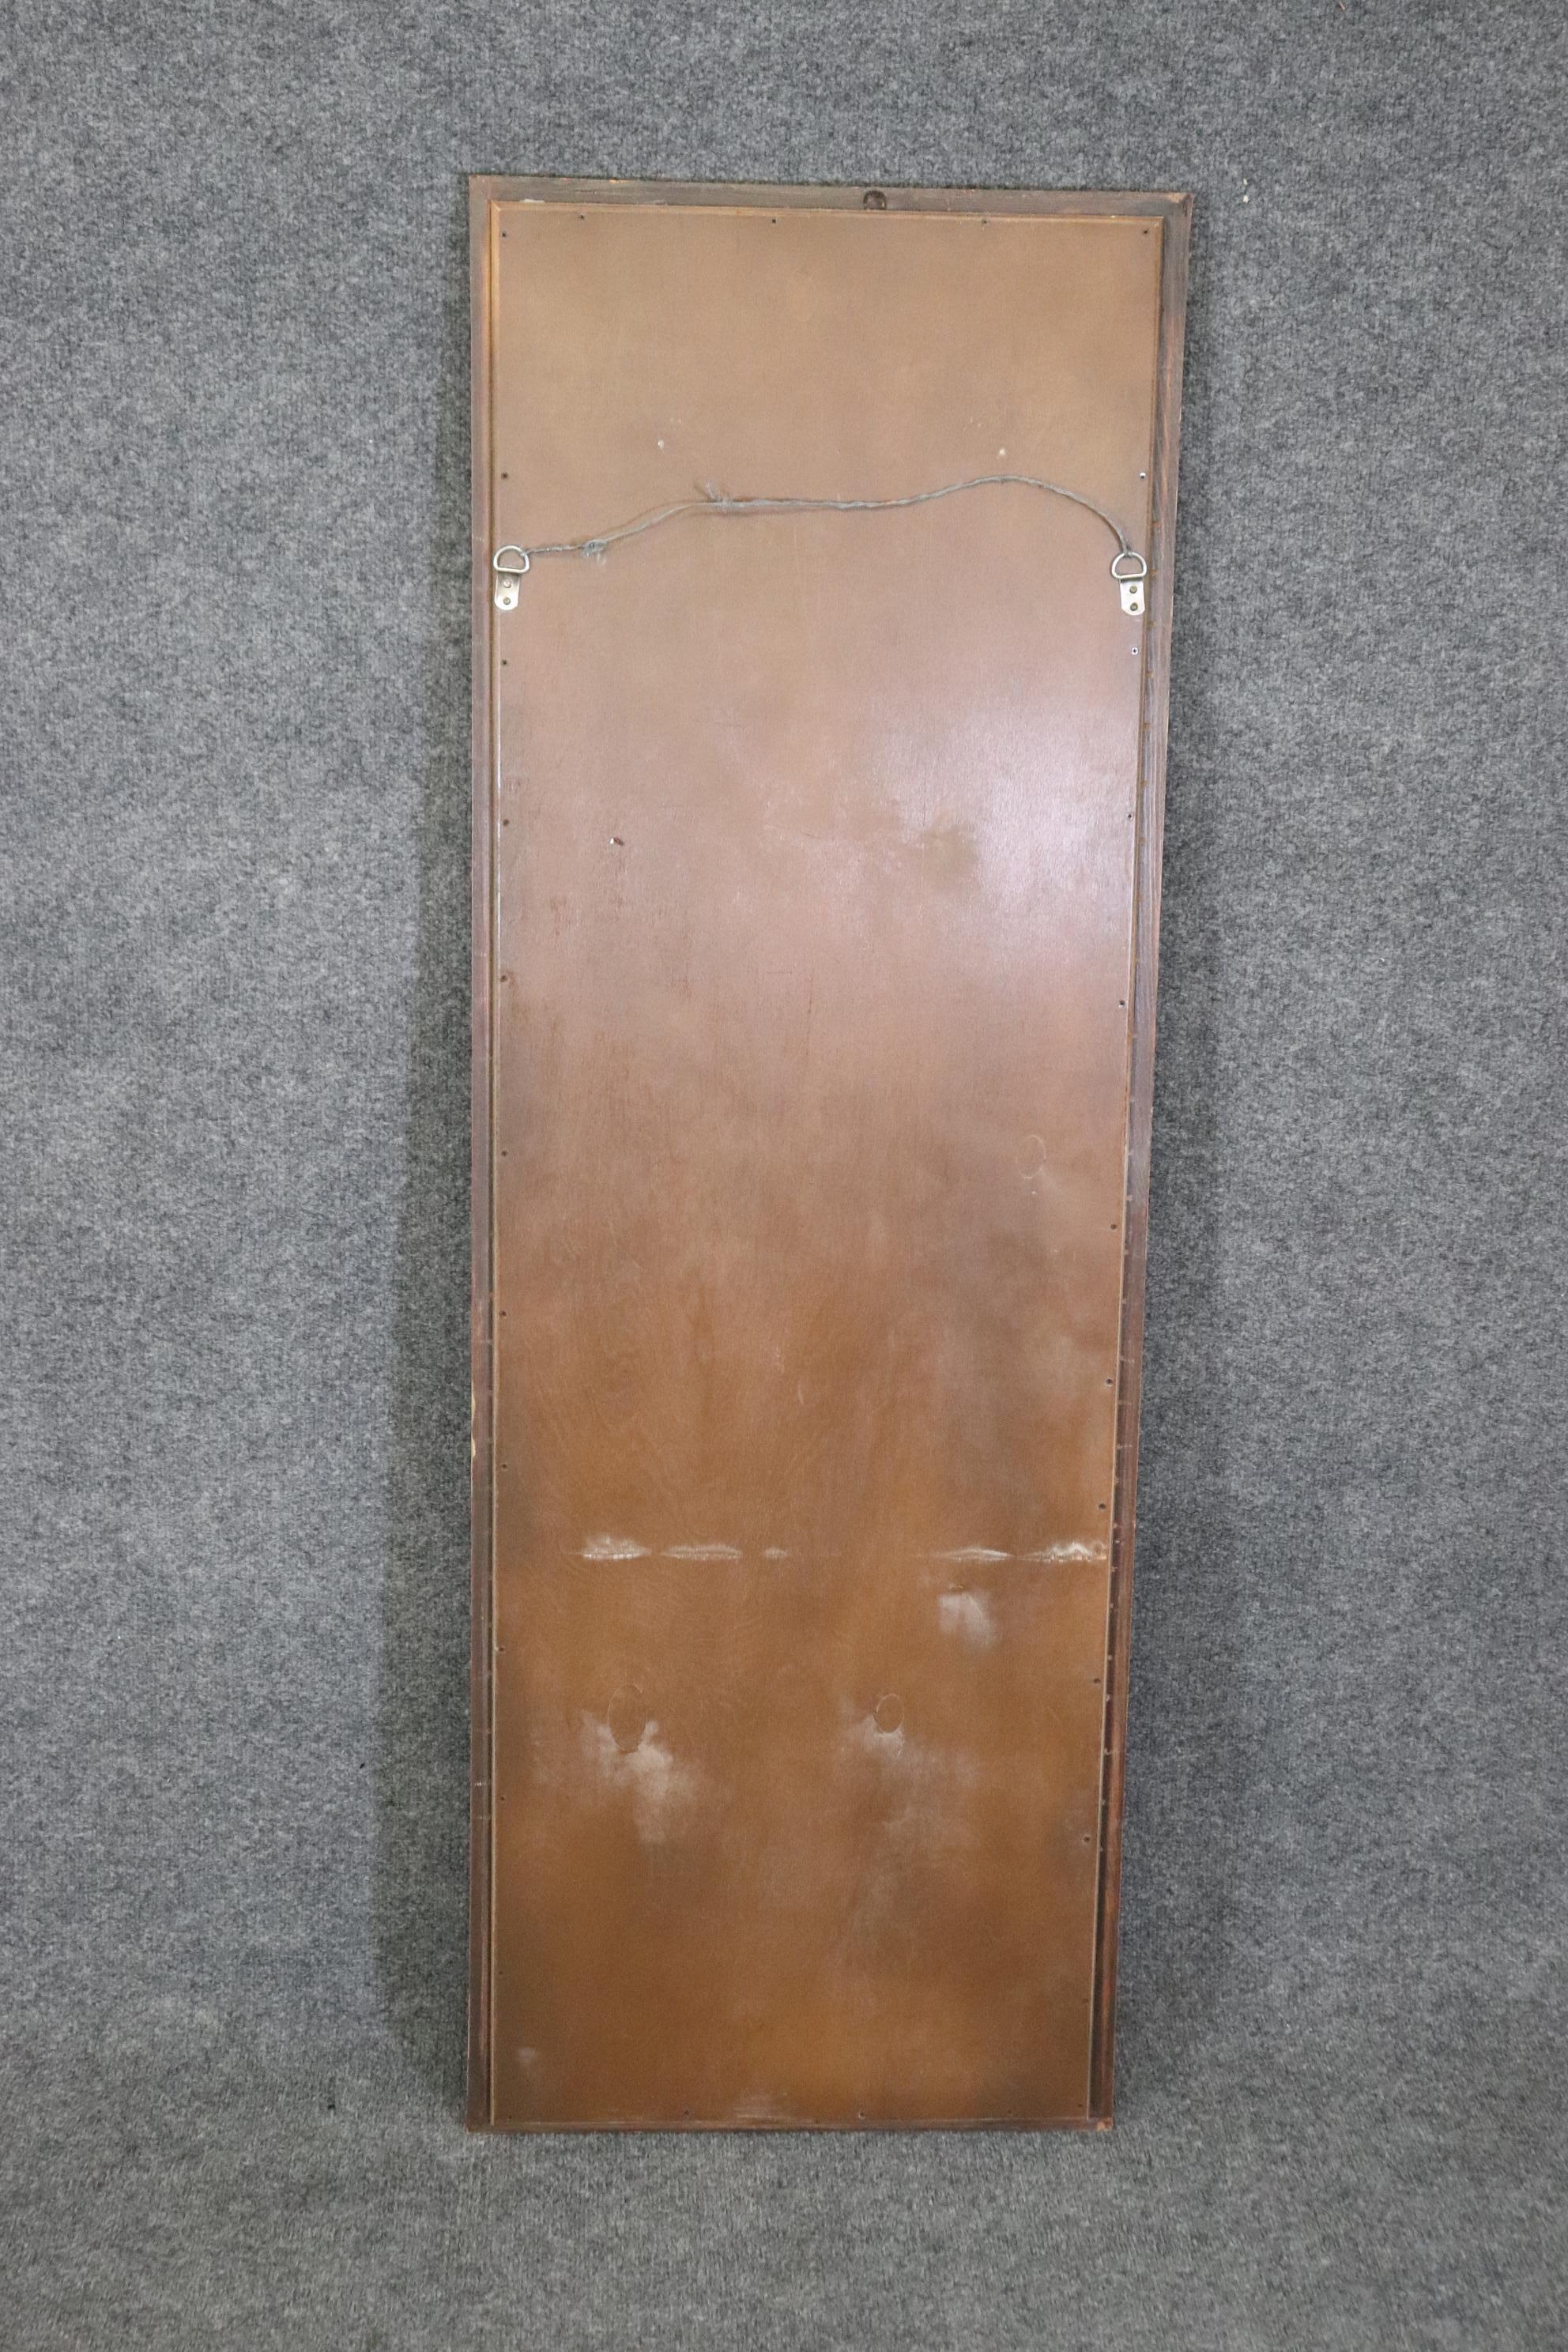 This is a gorgeous narrow mirror that can be hung vertically or horizontally. The mirror is in good condition and has no major signs of wear or damage. The mirror measures 58.25 tall x 20 inches wide x 2 inches thick. The mirror dates to the 1940s. 